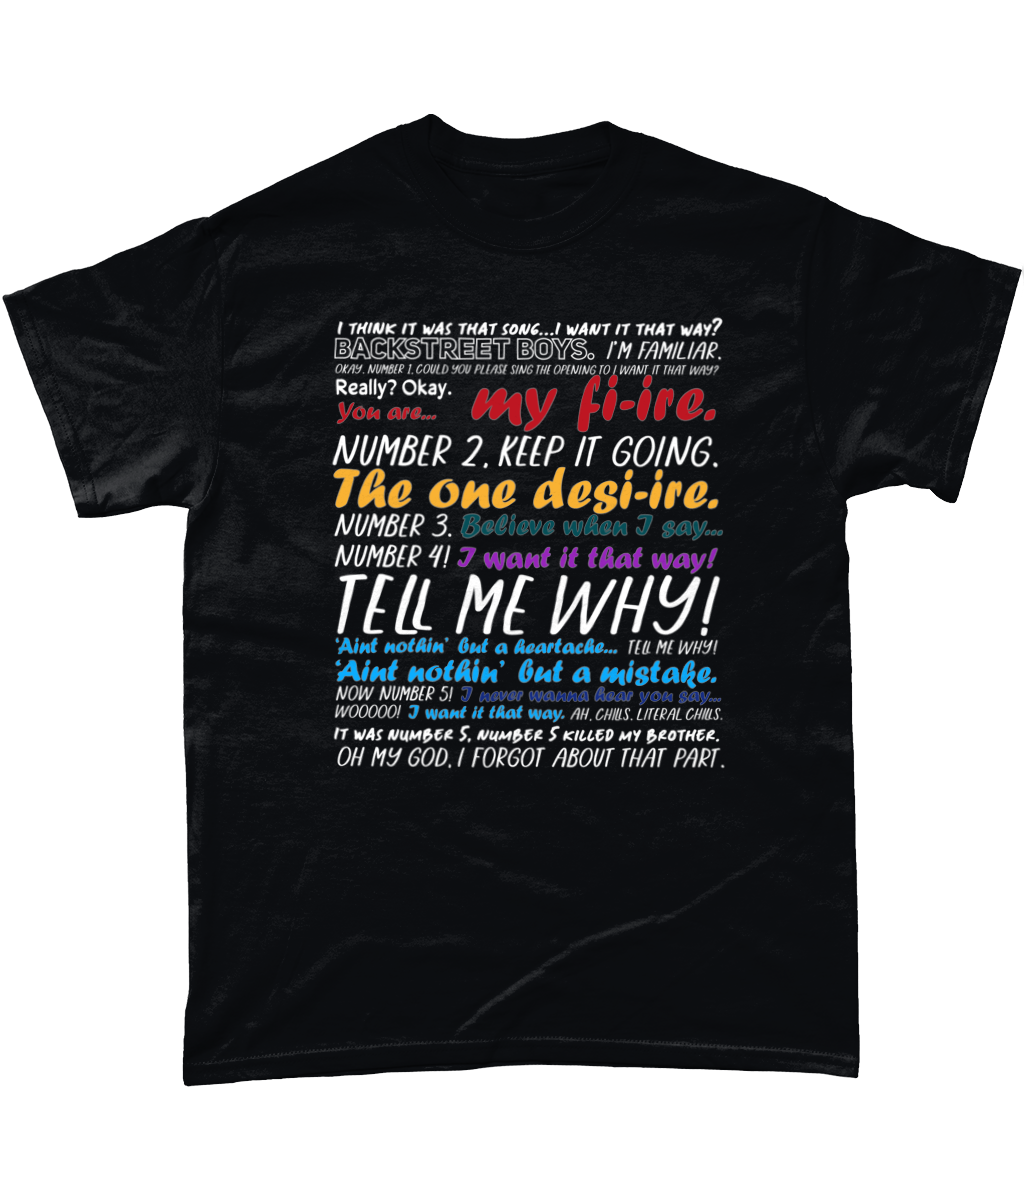 I Want It That Way Colourful T-Shirt